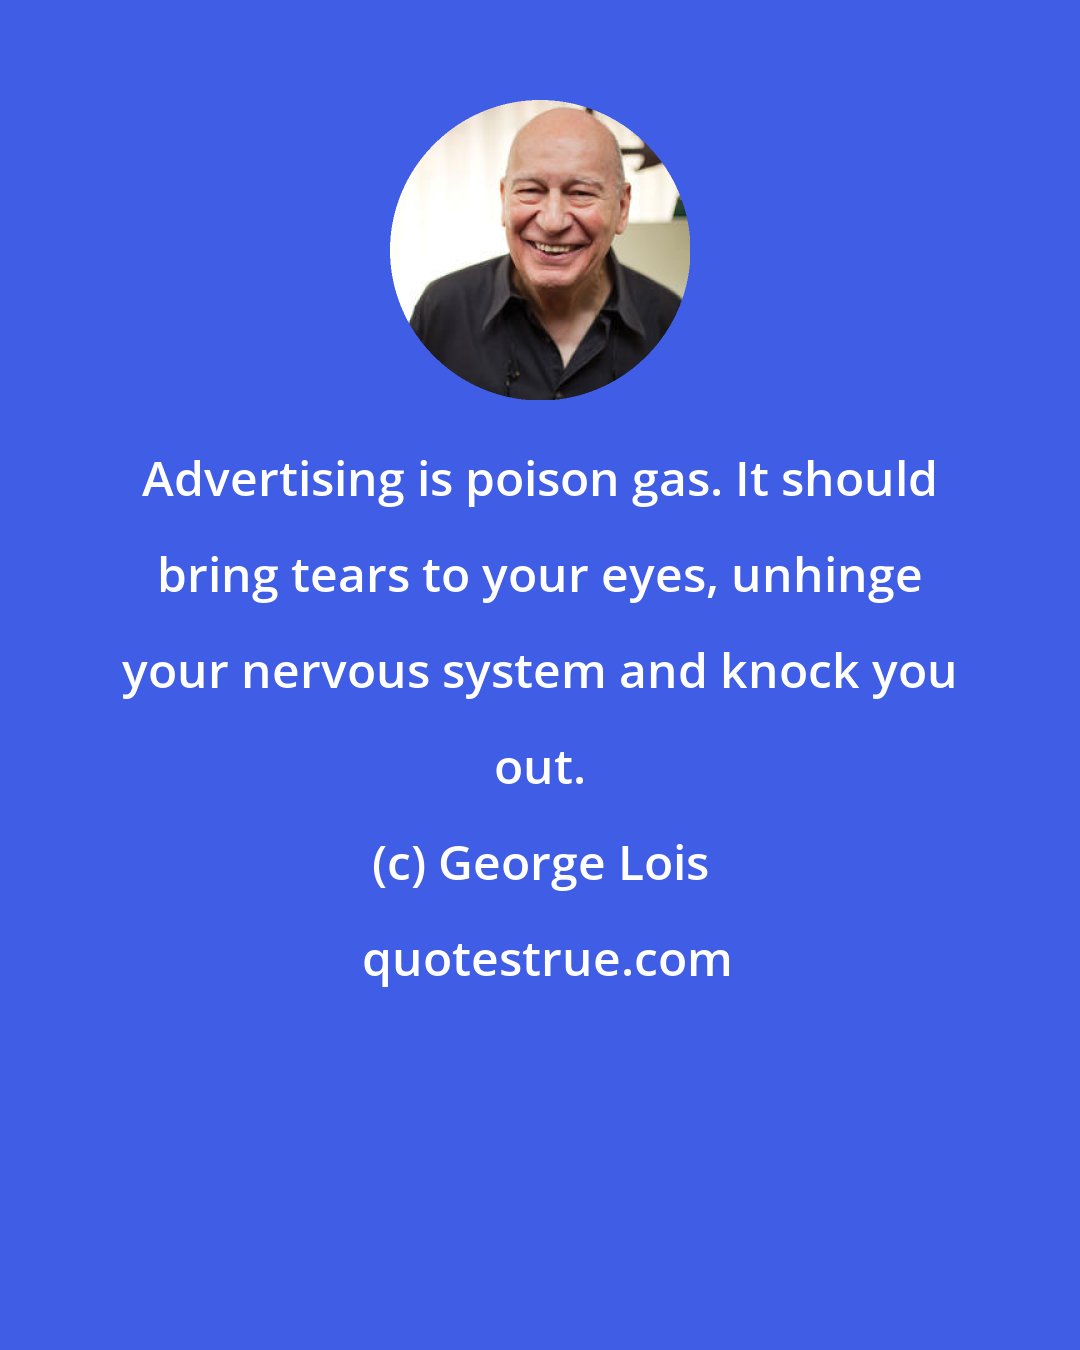 George Lois: Advertising is poison gas. It should bring tears to your eyes, unhinge your nervous system and knock you out.